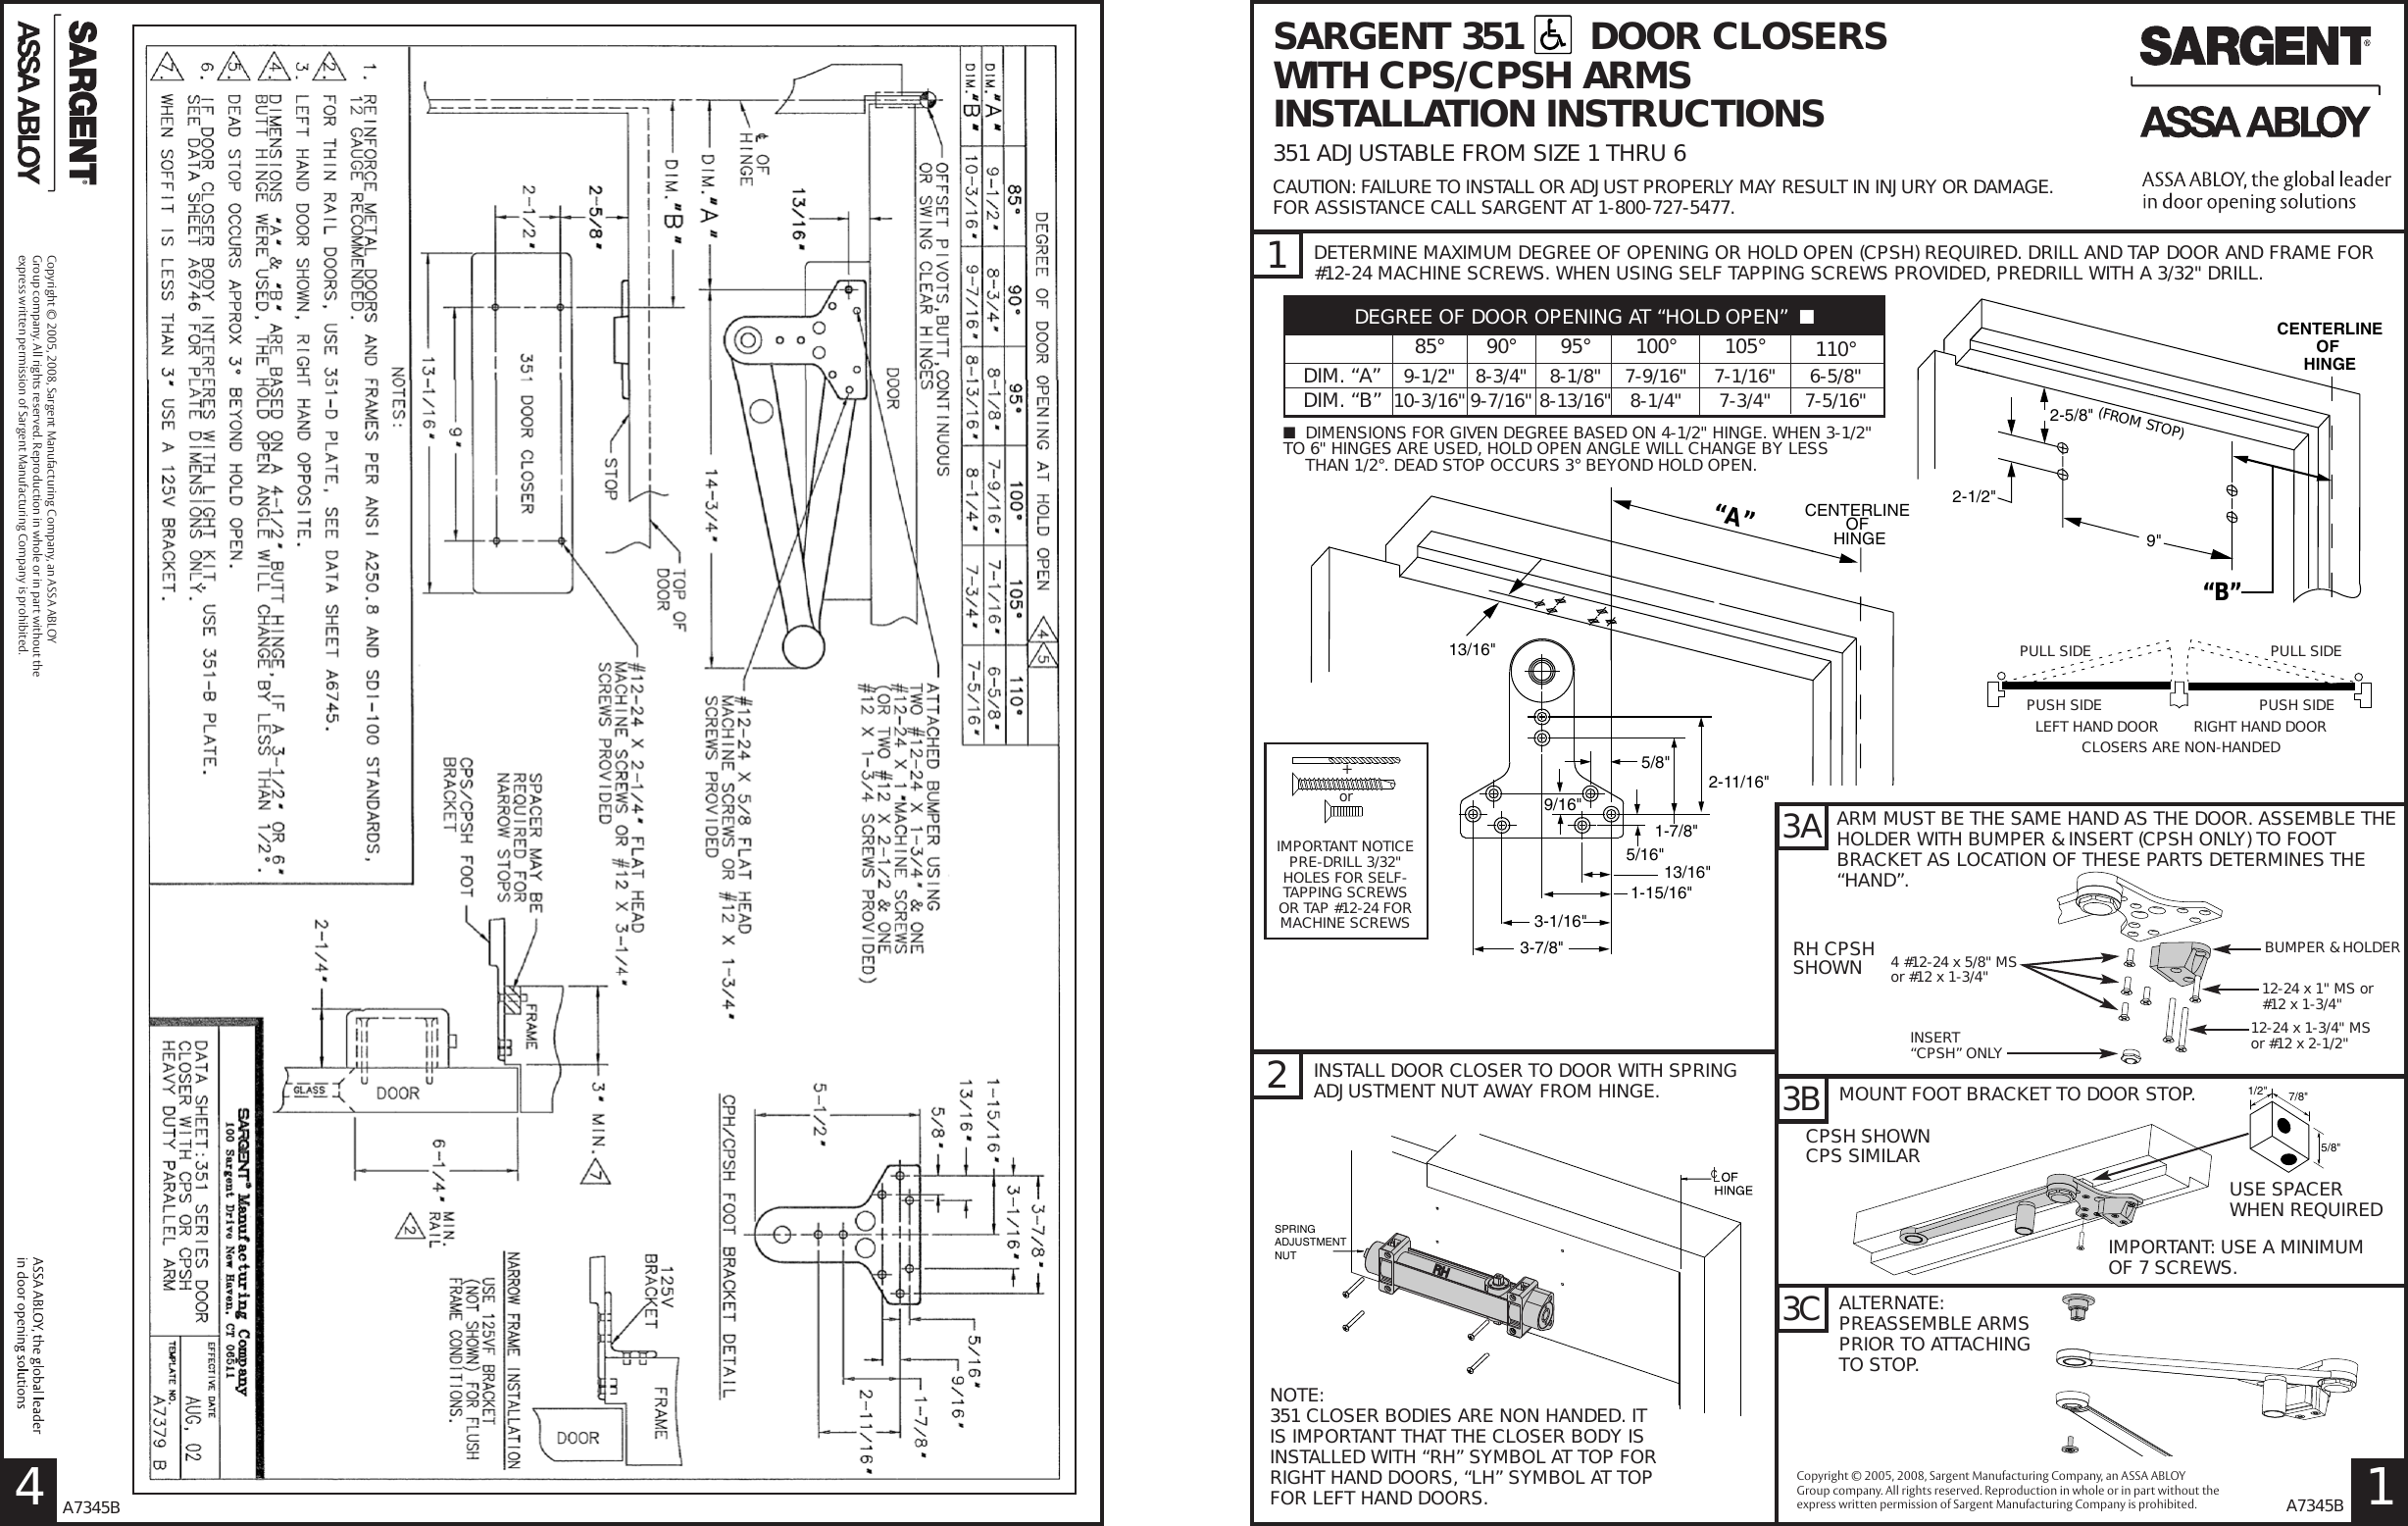 Page 4 of 4 - Sargent 351 Series Door Closers With CPS & CPSH Holder Arms Installation Instructions A7345